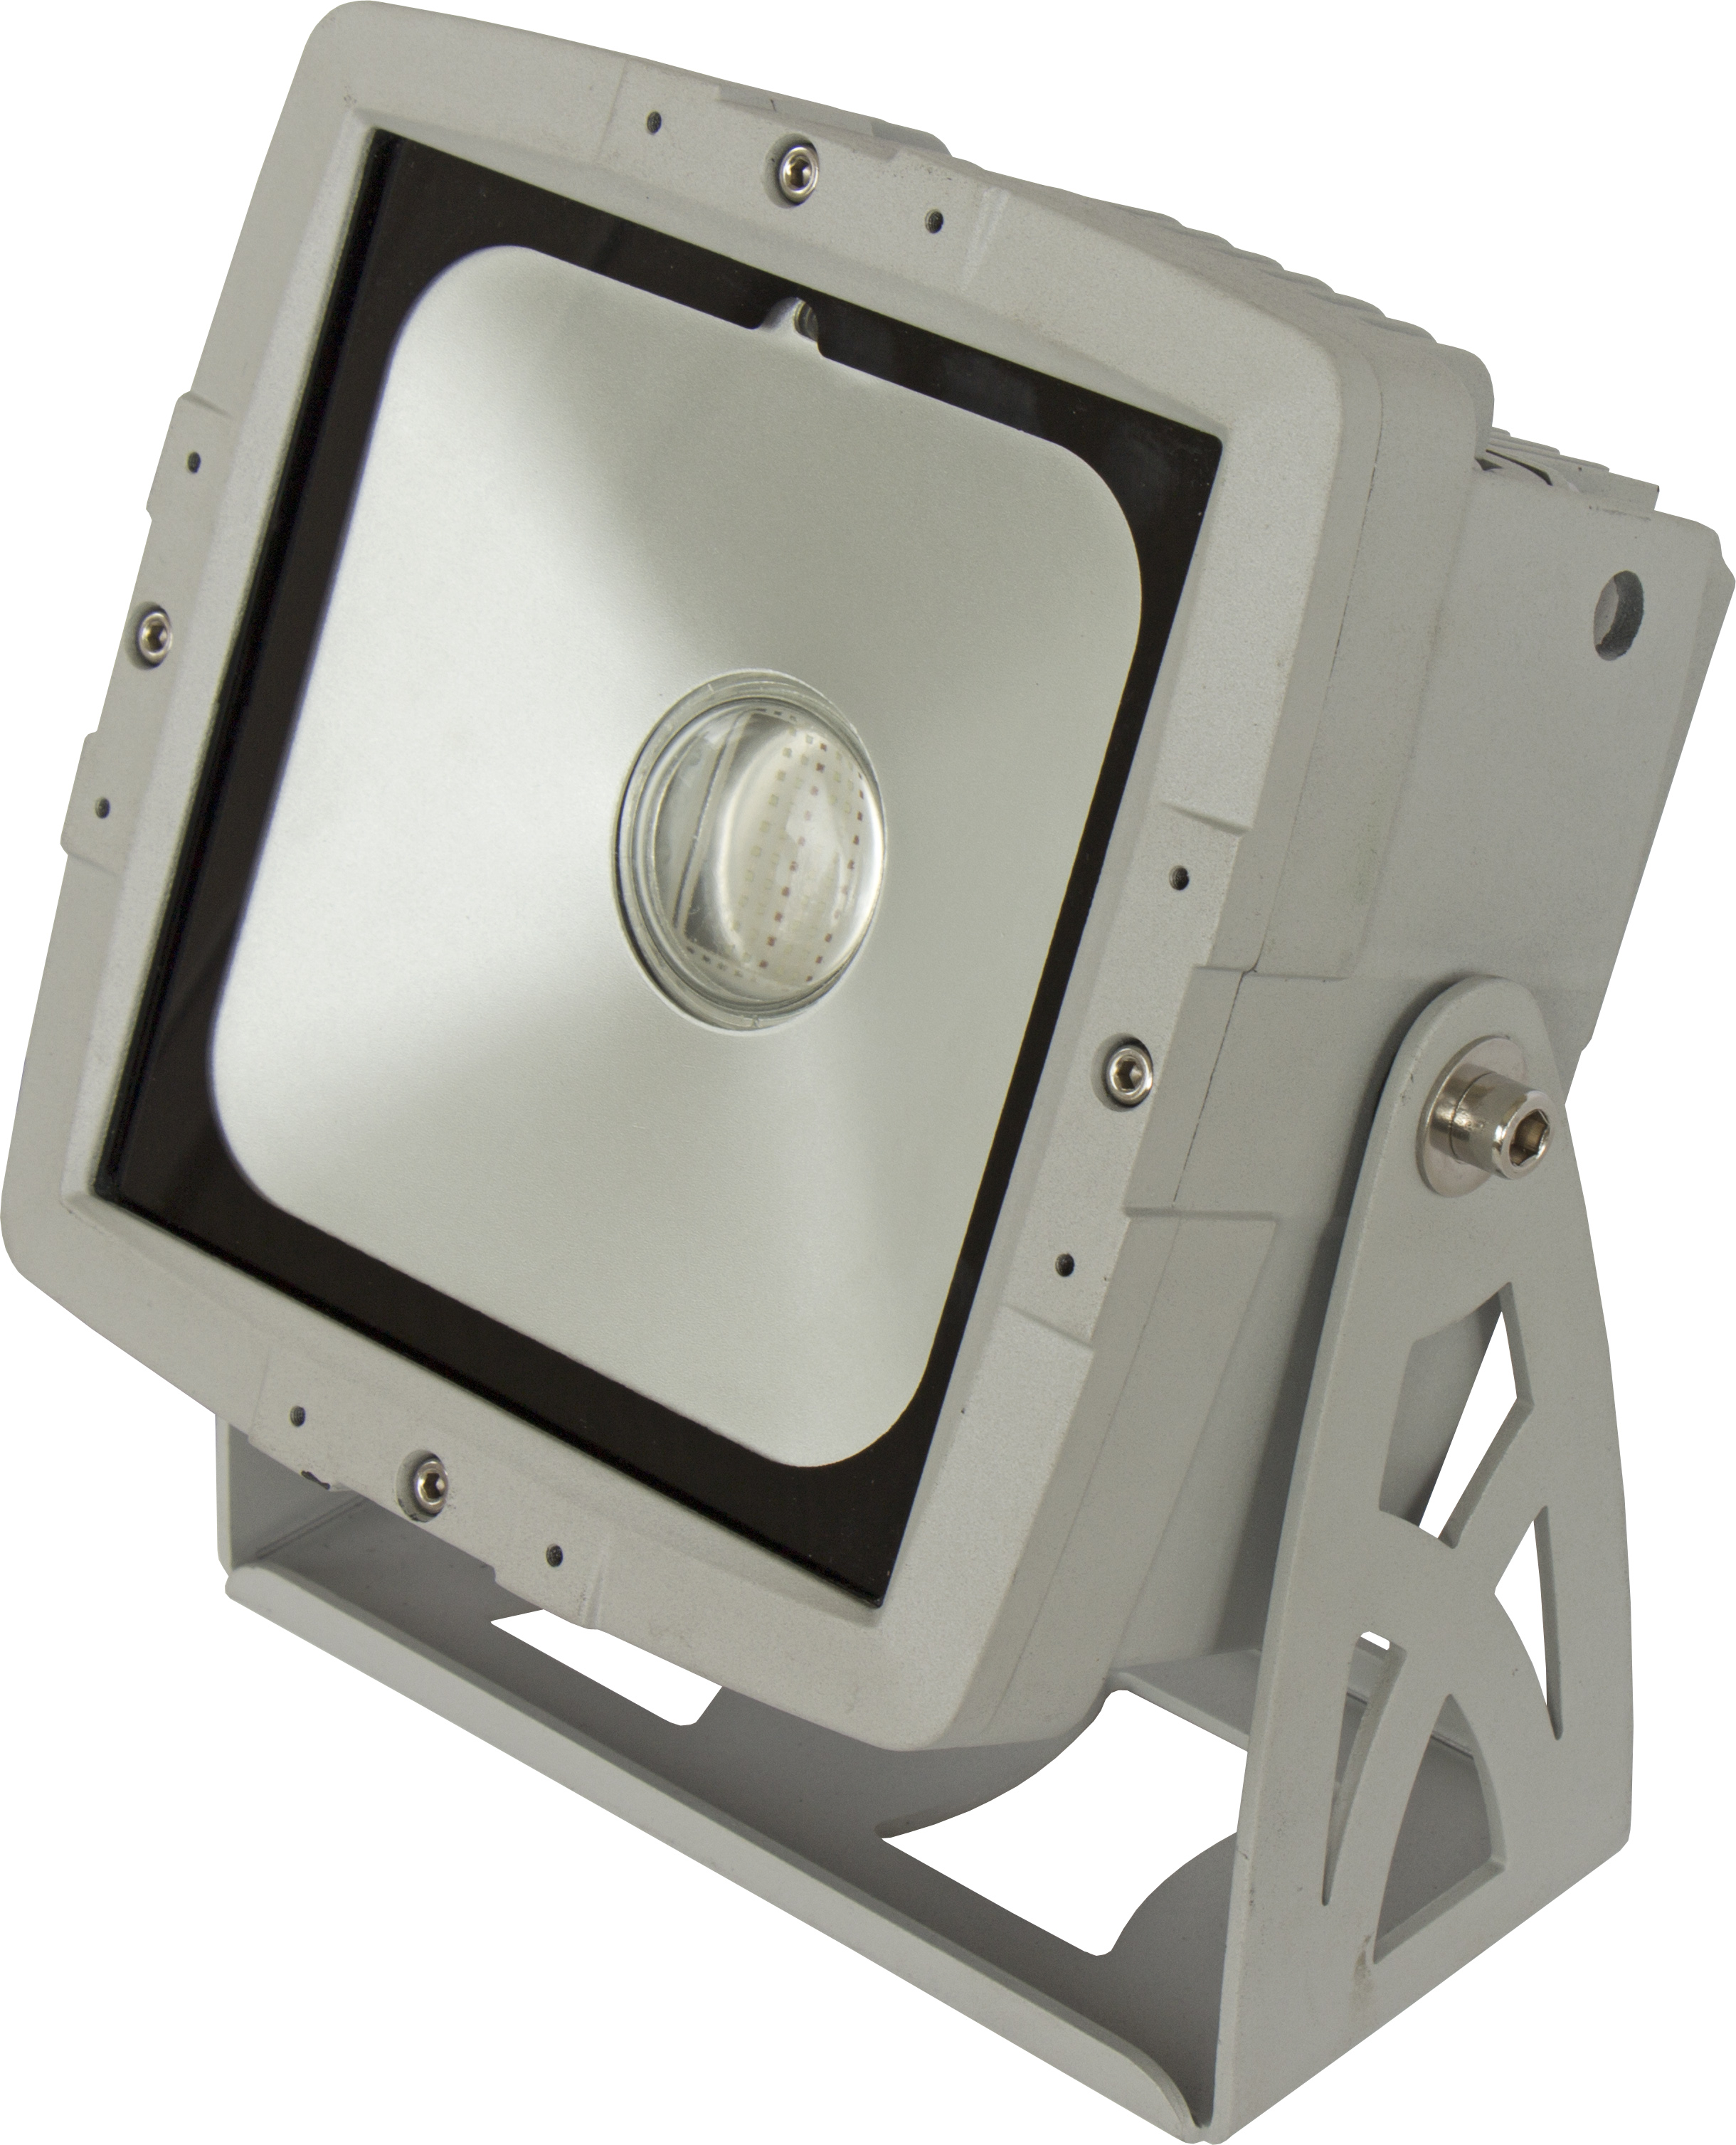 Powerful indoor / outdoor IP65 LED projector equipped with a 60W COB RGB led for smaller applications